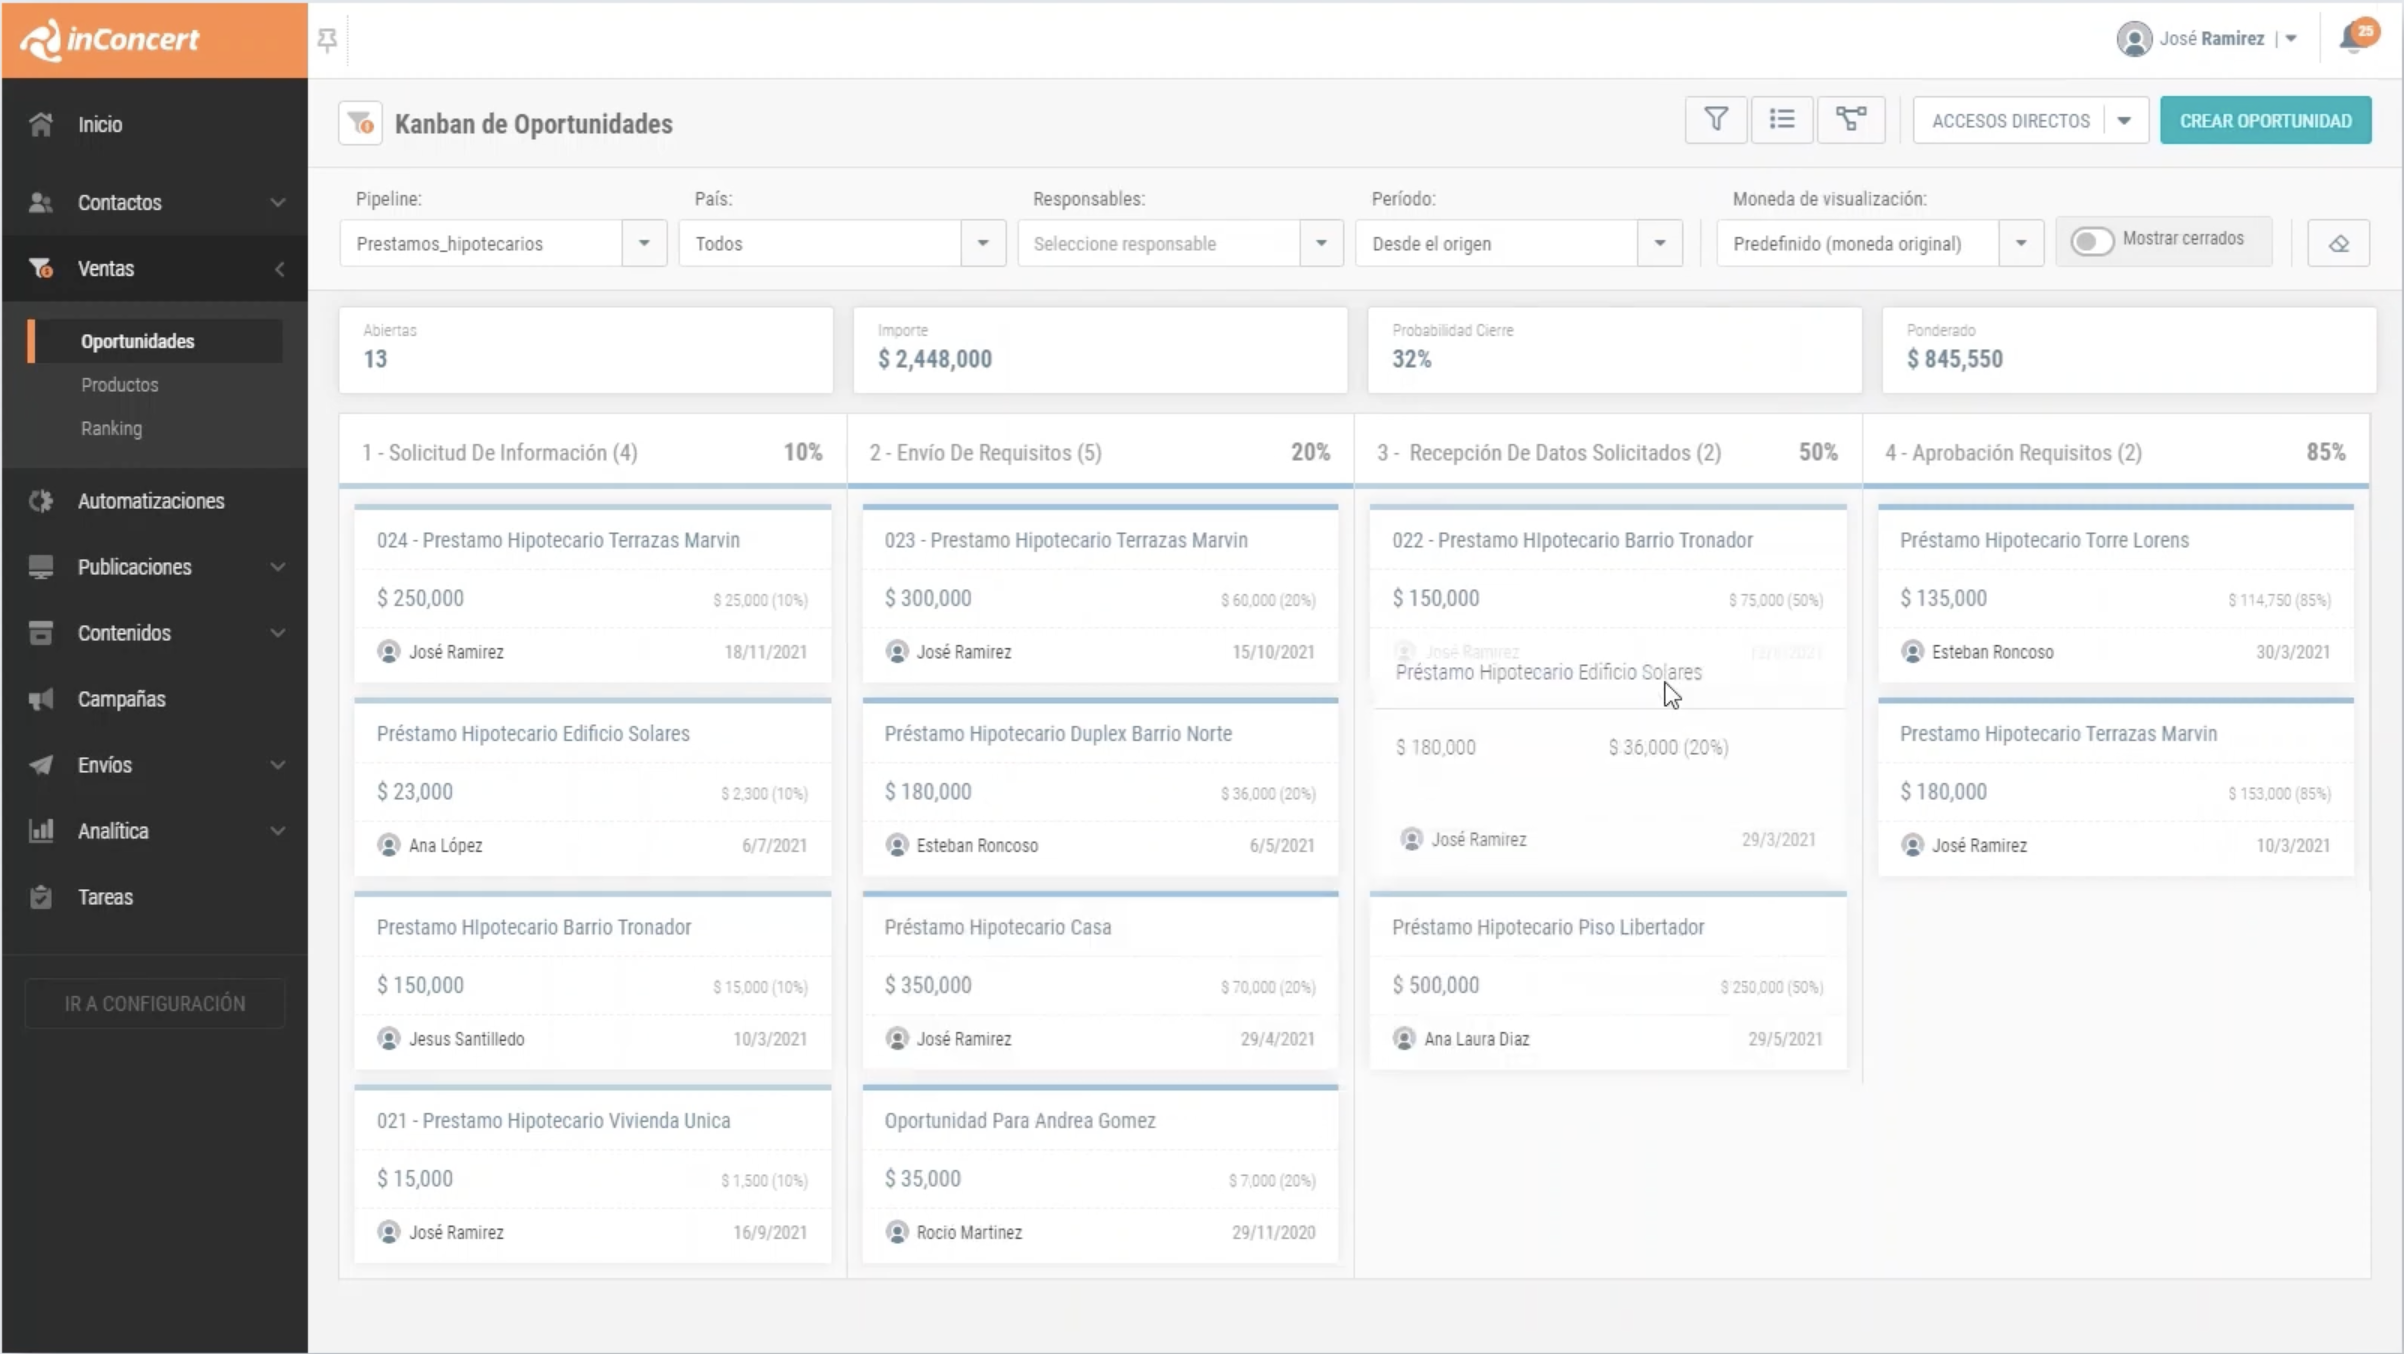 Pipeline management: Manage multiple pipelines and sales teams. Track the progress and likelihood of closing each sales opportunity. Generate your own, fully customizable pipelines that reflect all tasks and elements you need.